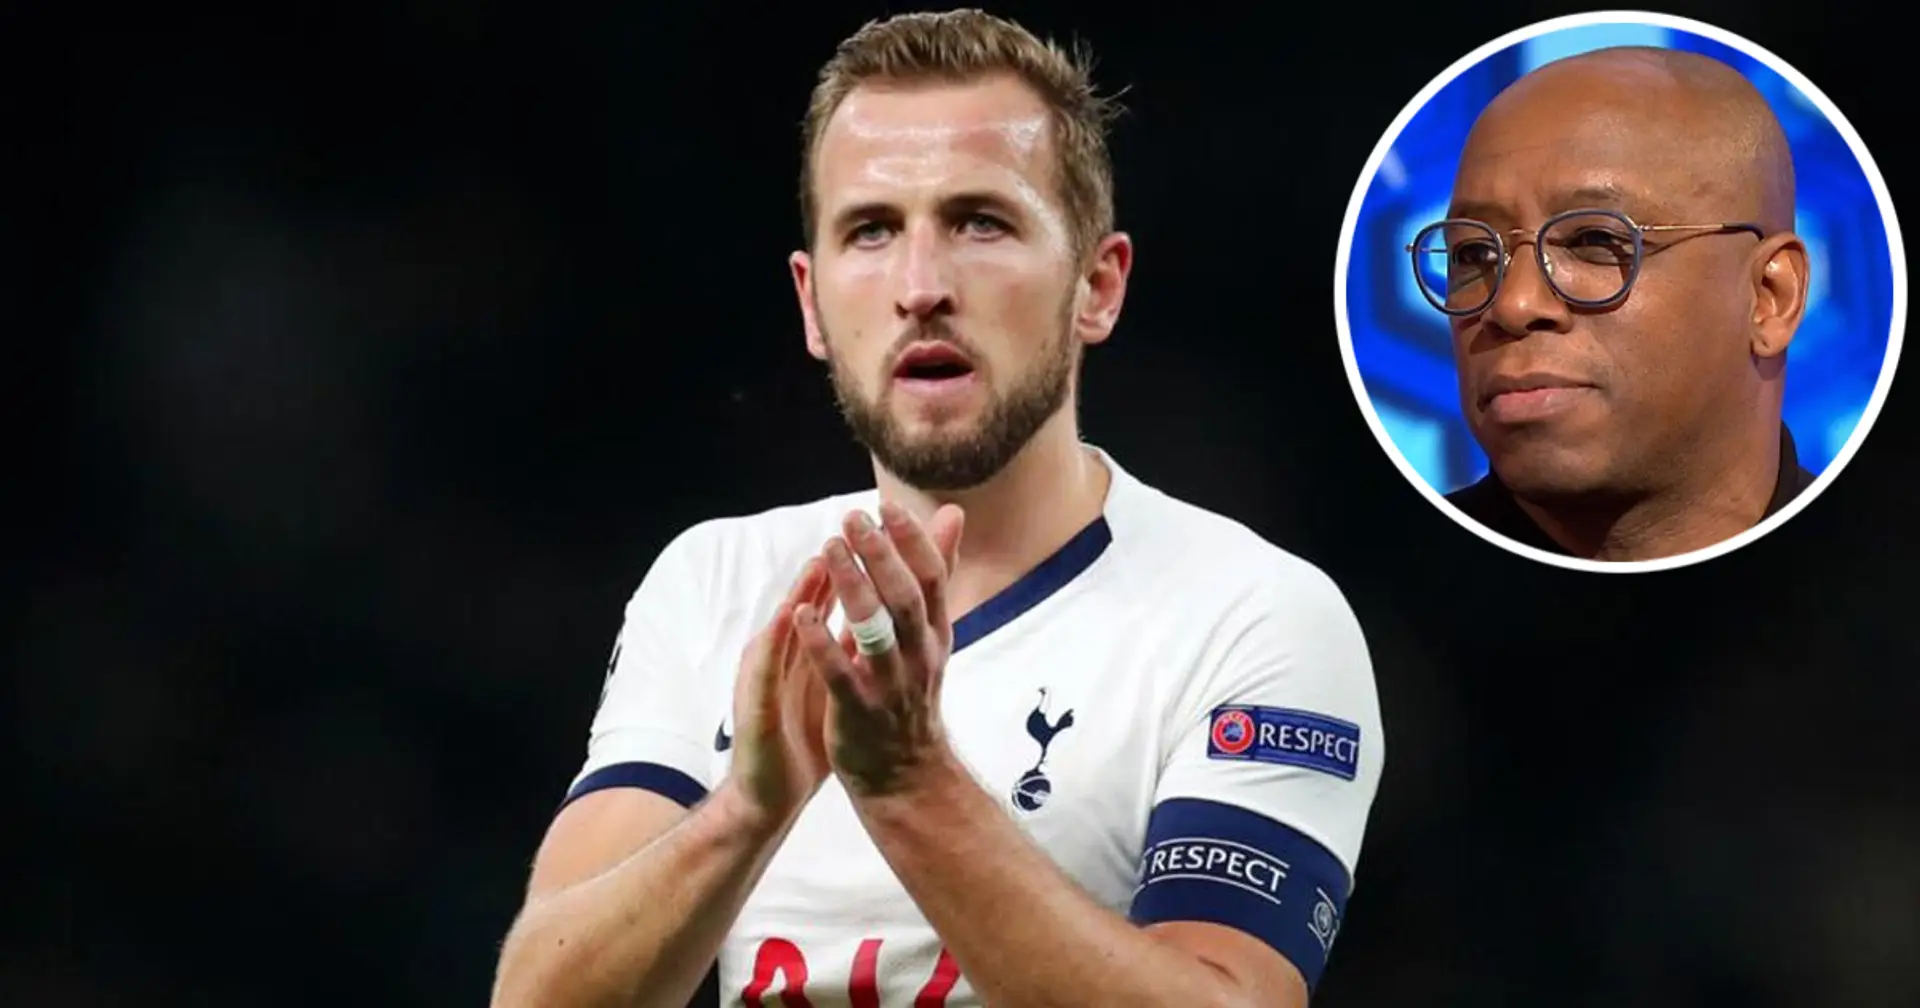 Ian Wright confident Harry Kane will spell trouble for Man United - even with Bruno Fernandes at his best